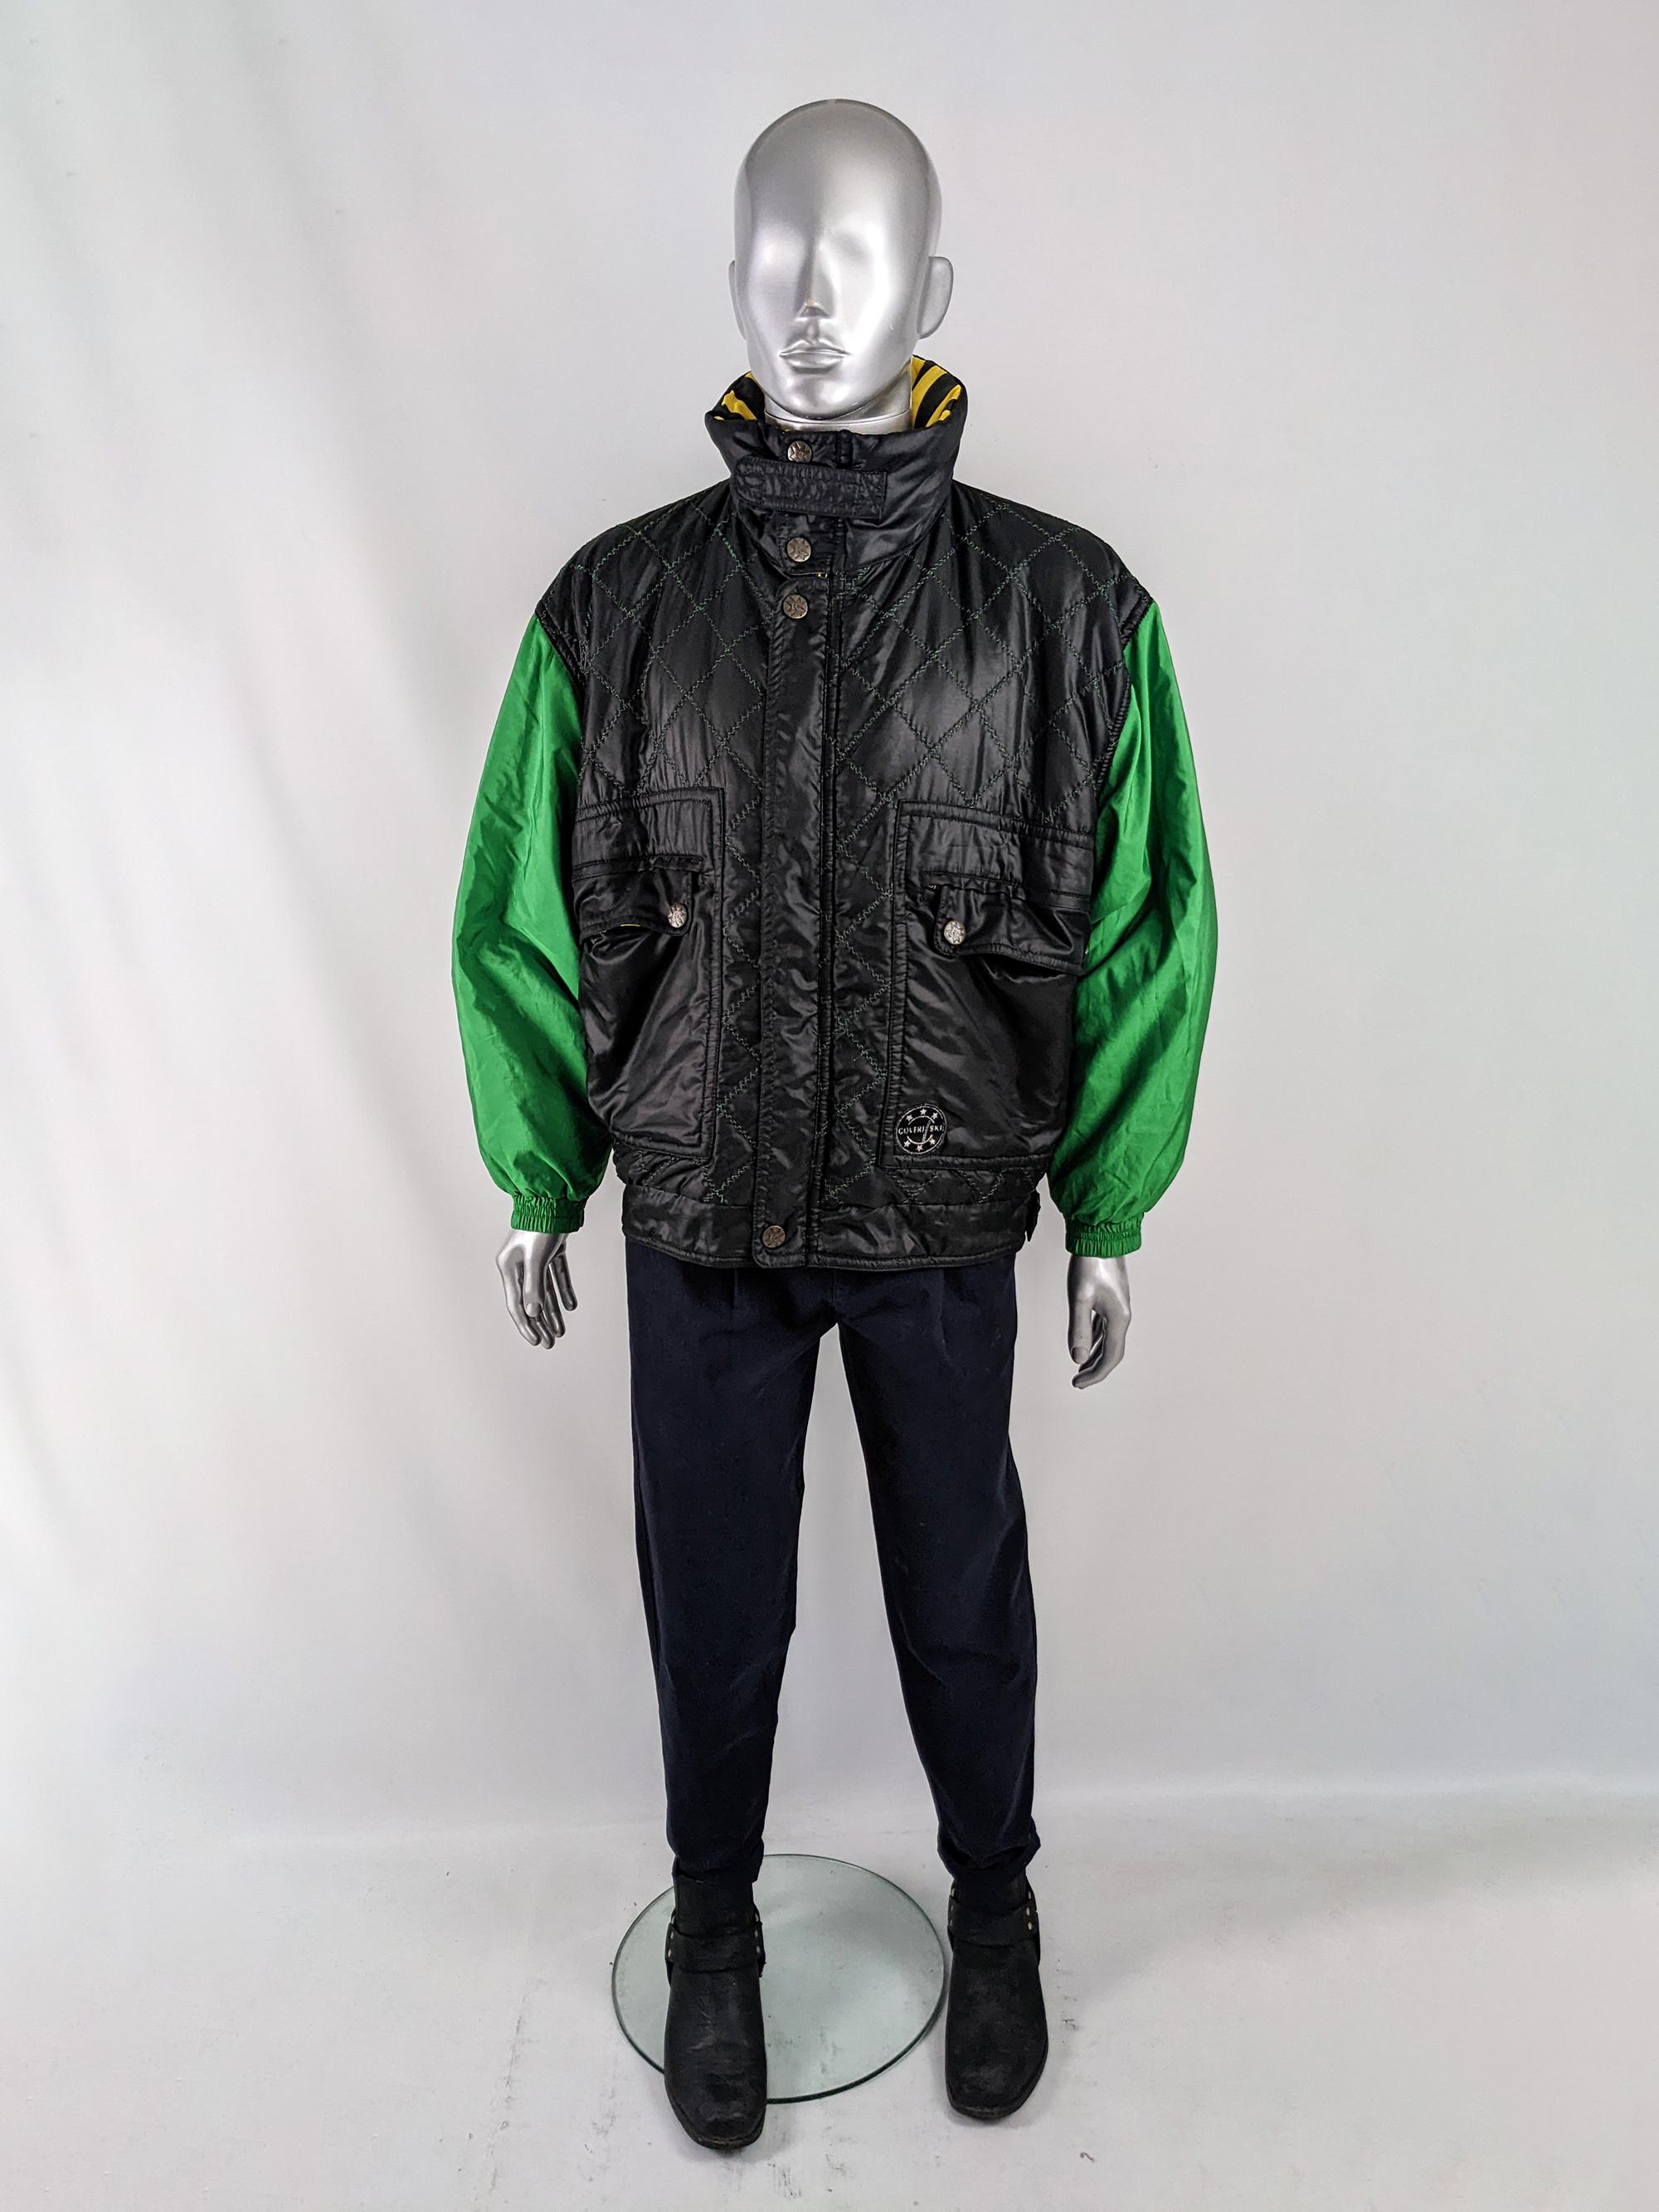 Size: Marked IT 50 / UK 40 which roughly equates to a mens Medium to Large but this gives a loose fit like most bomber jackets. Please check the measurements.
Chest - 54” / 137cm
Waist - 42” / 106cm
Length (Shoulder to Hem) - 26” / 66cm
Shoulder to